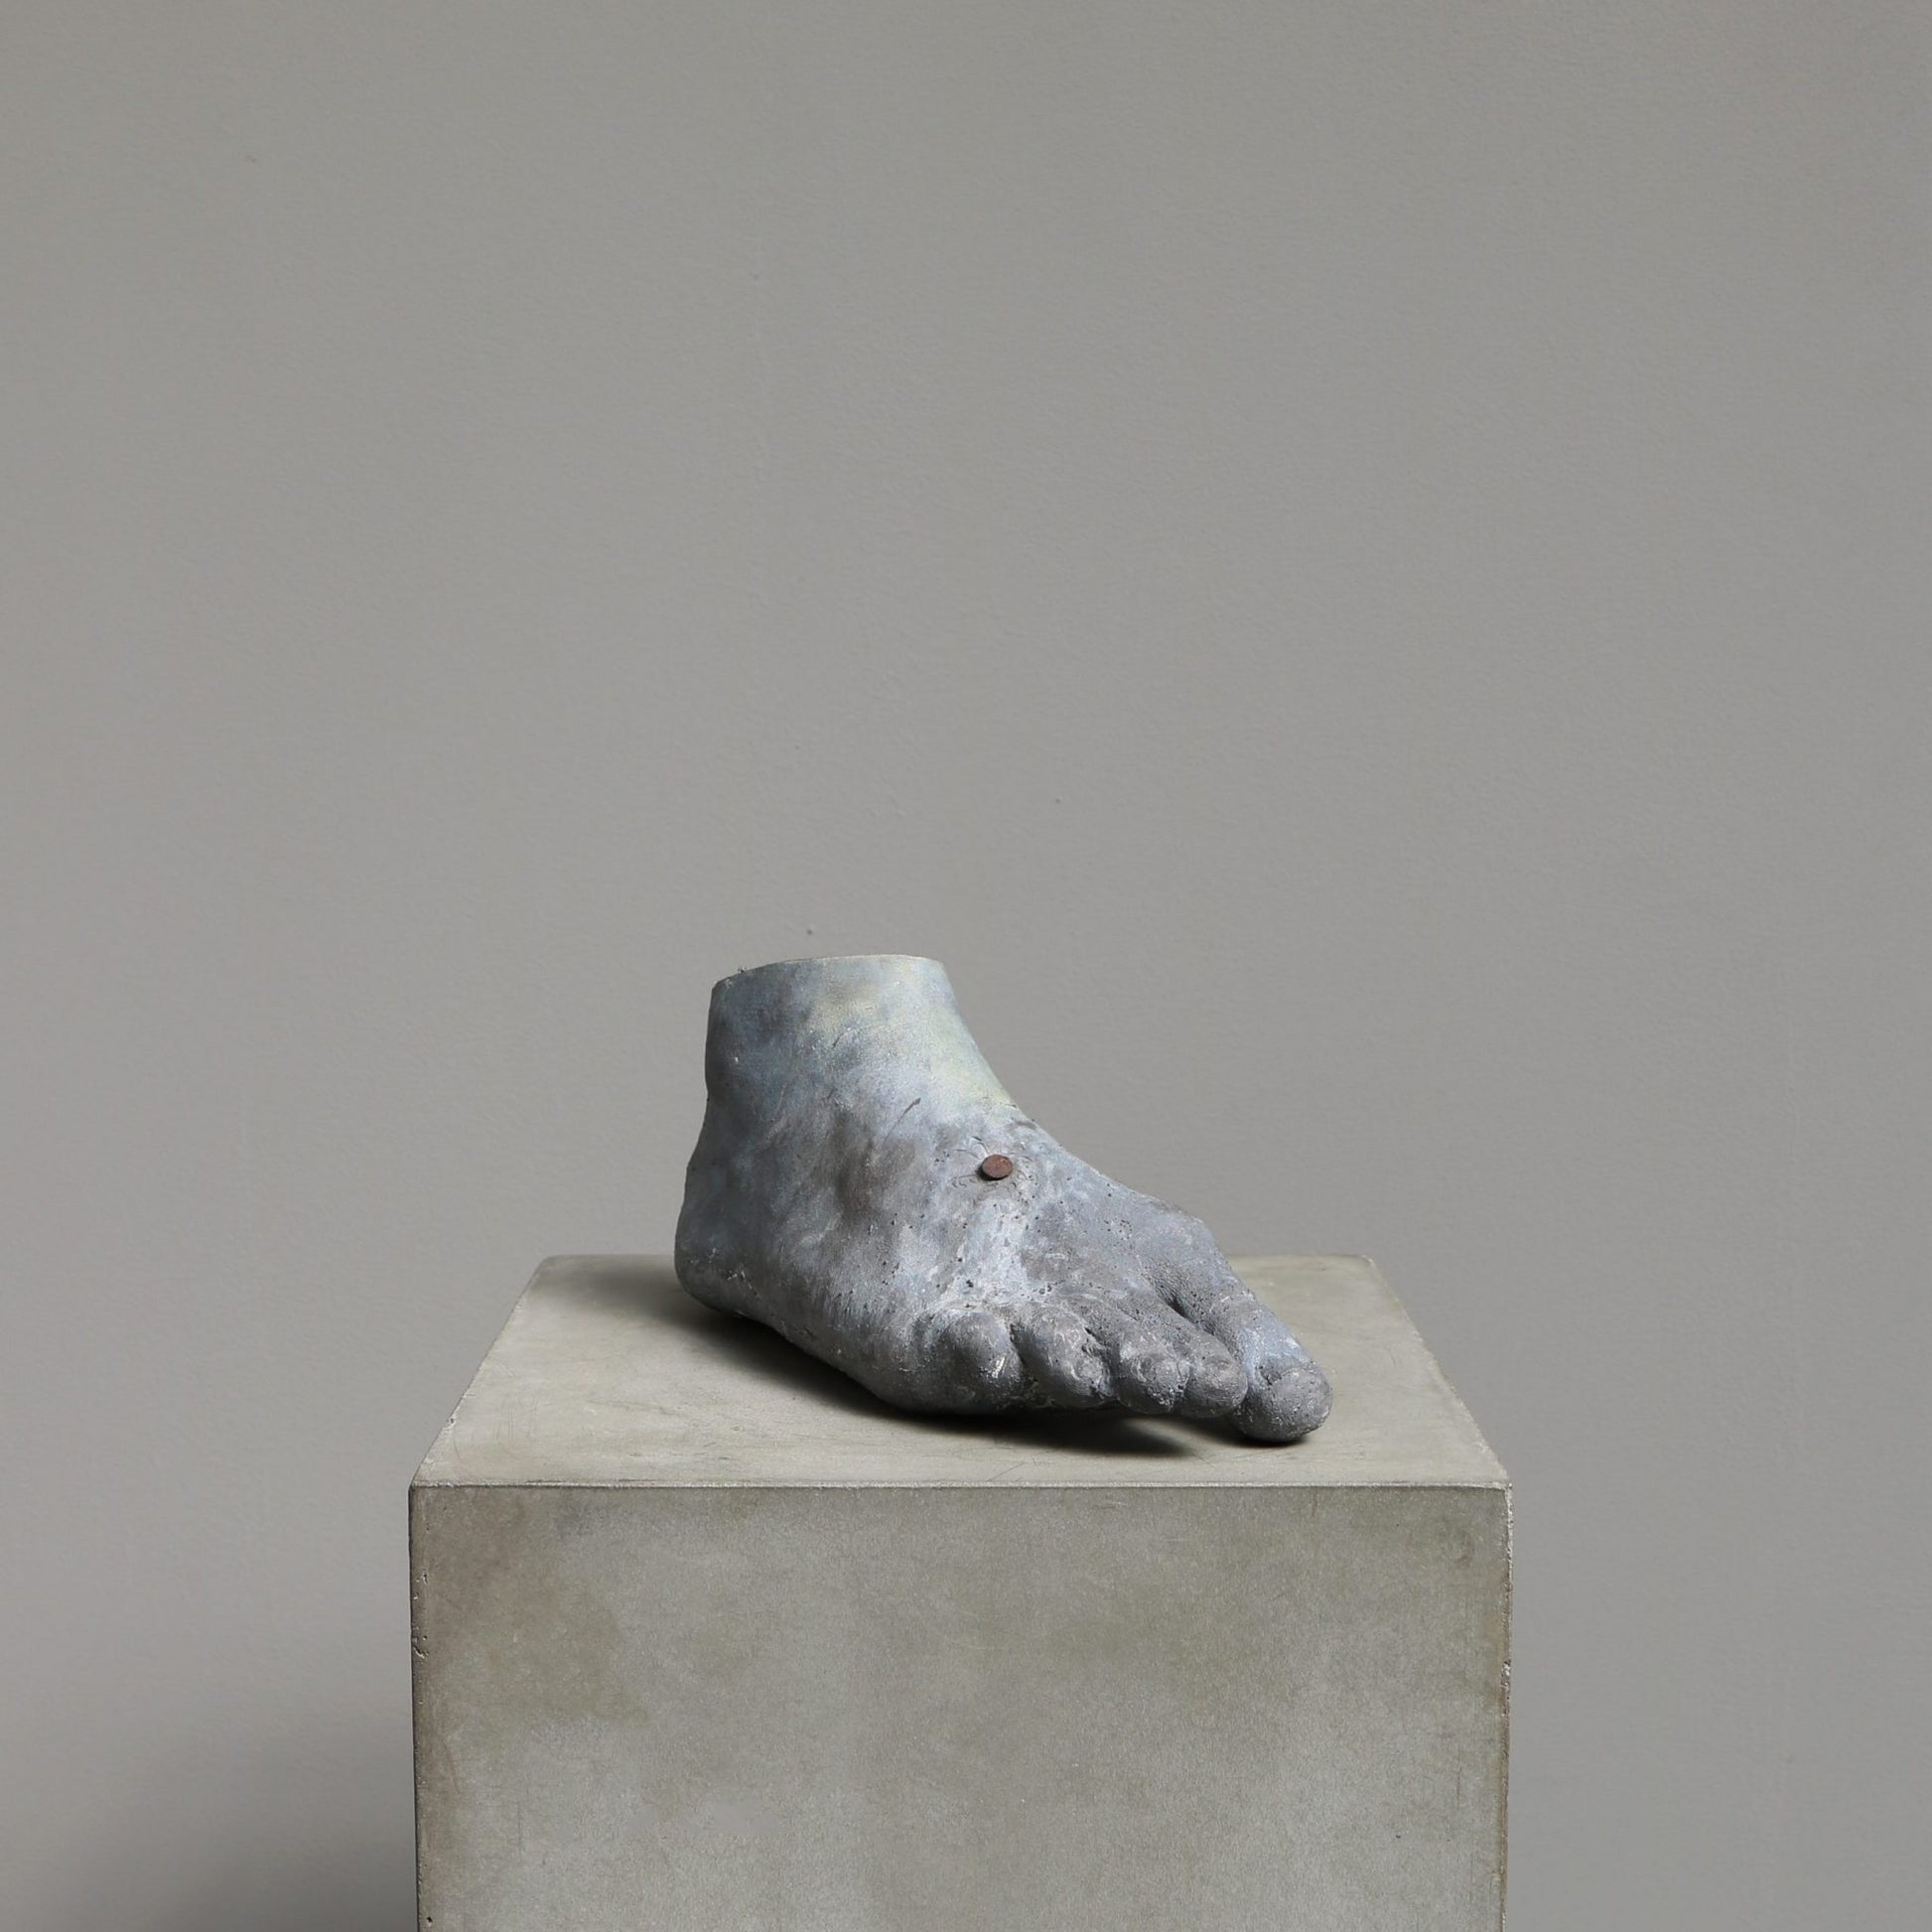 Begot (23517B) 2017 is a sculptural piece of a foot made by the Danish artist Kaare Golles. The sculpture is made in patinated lead.